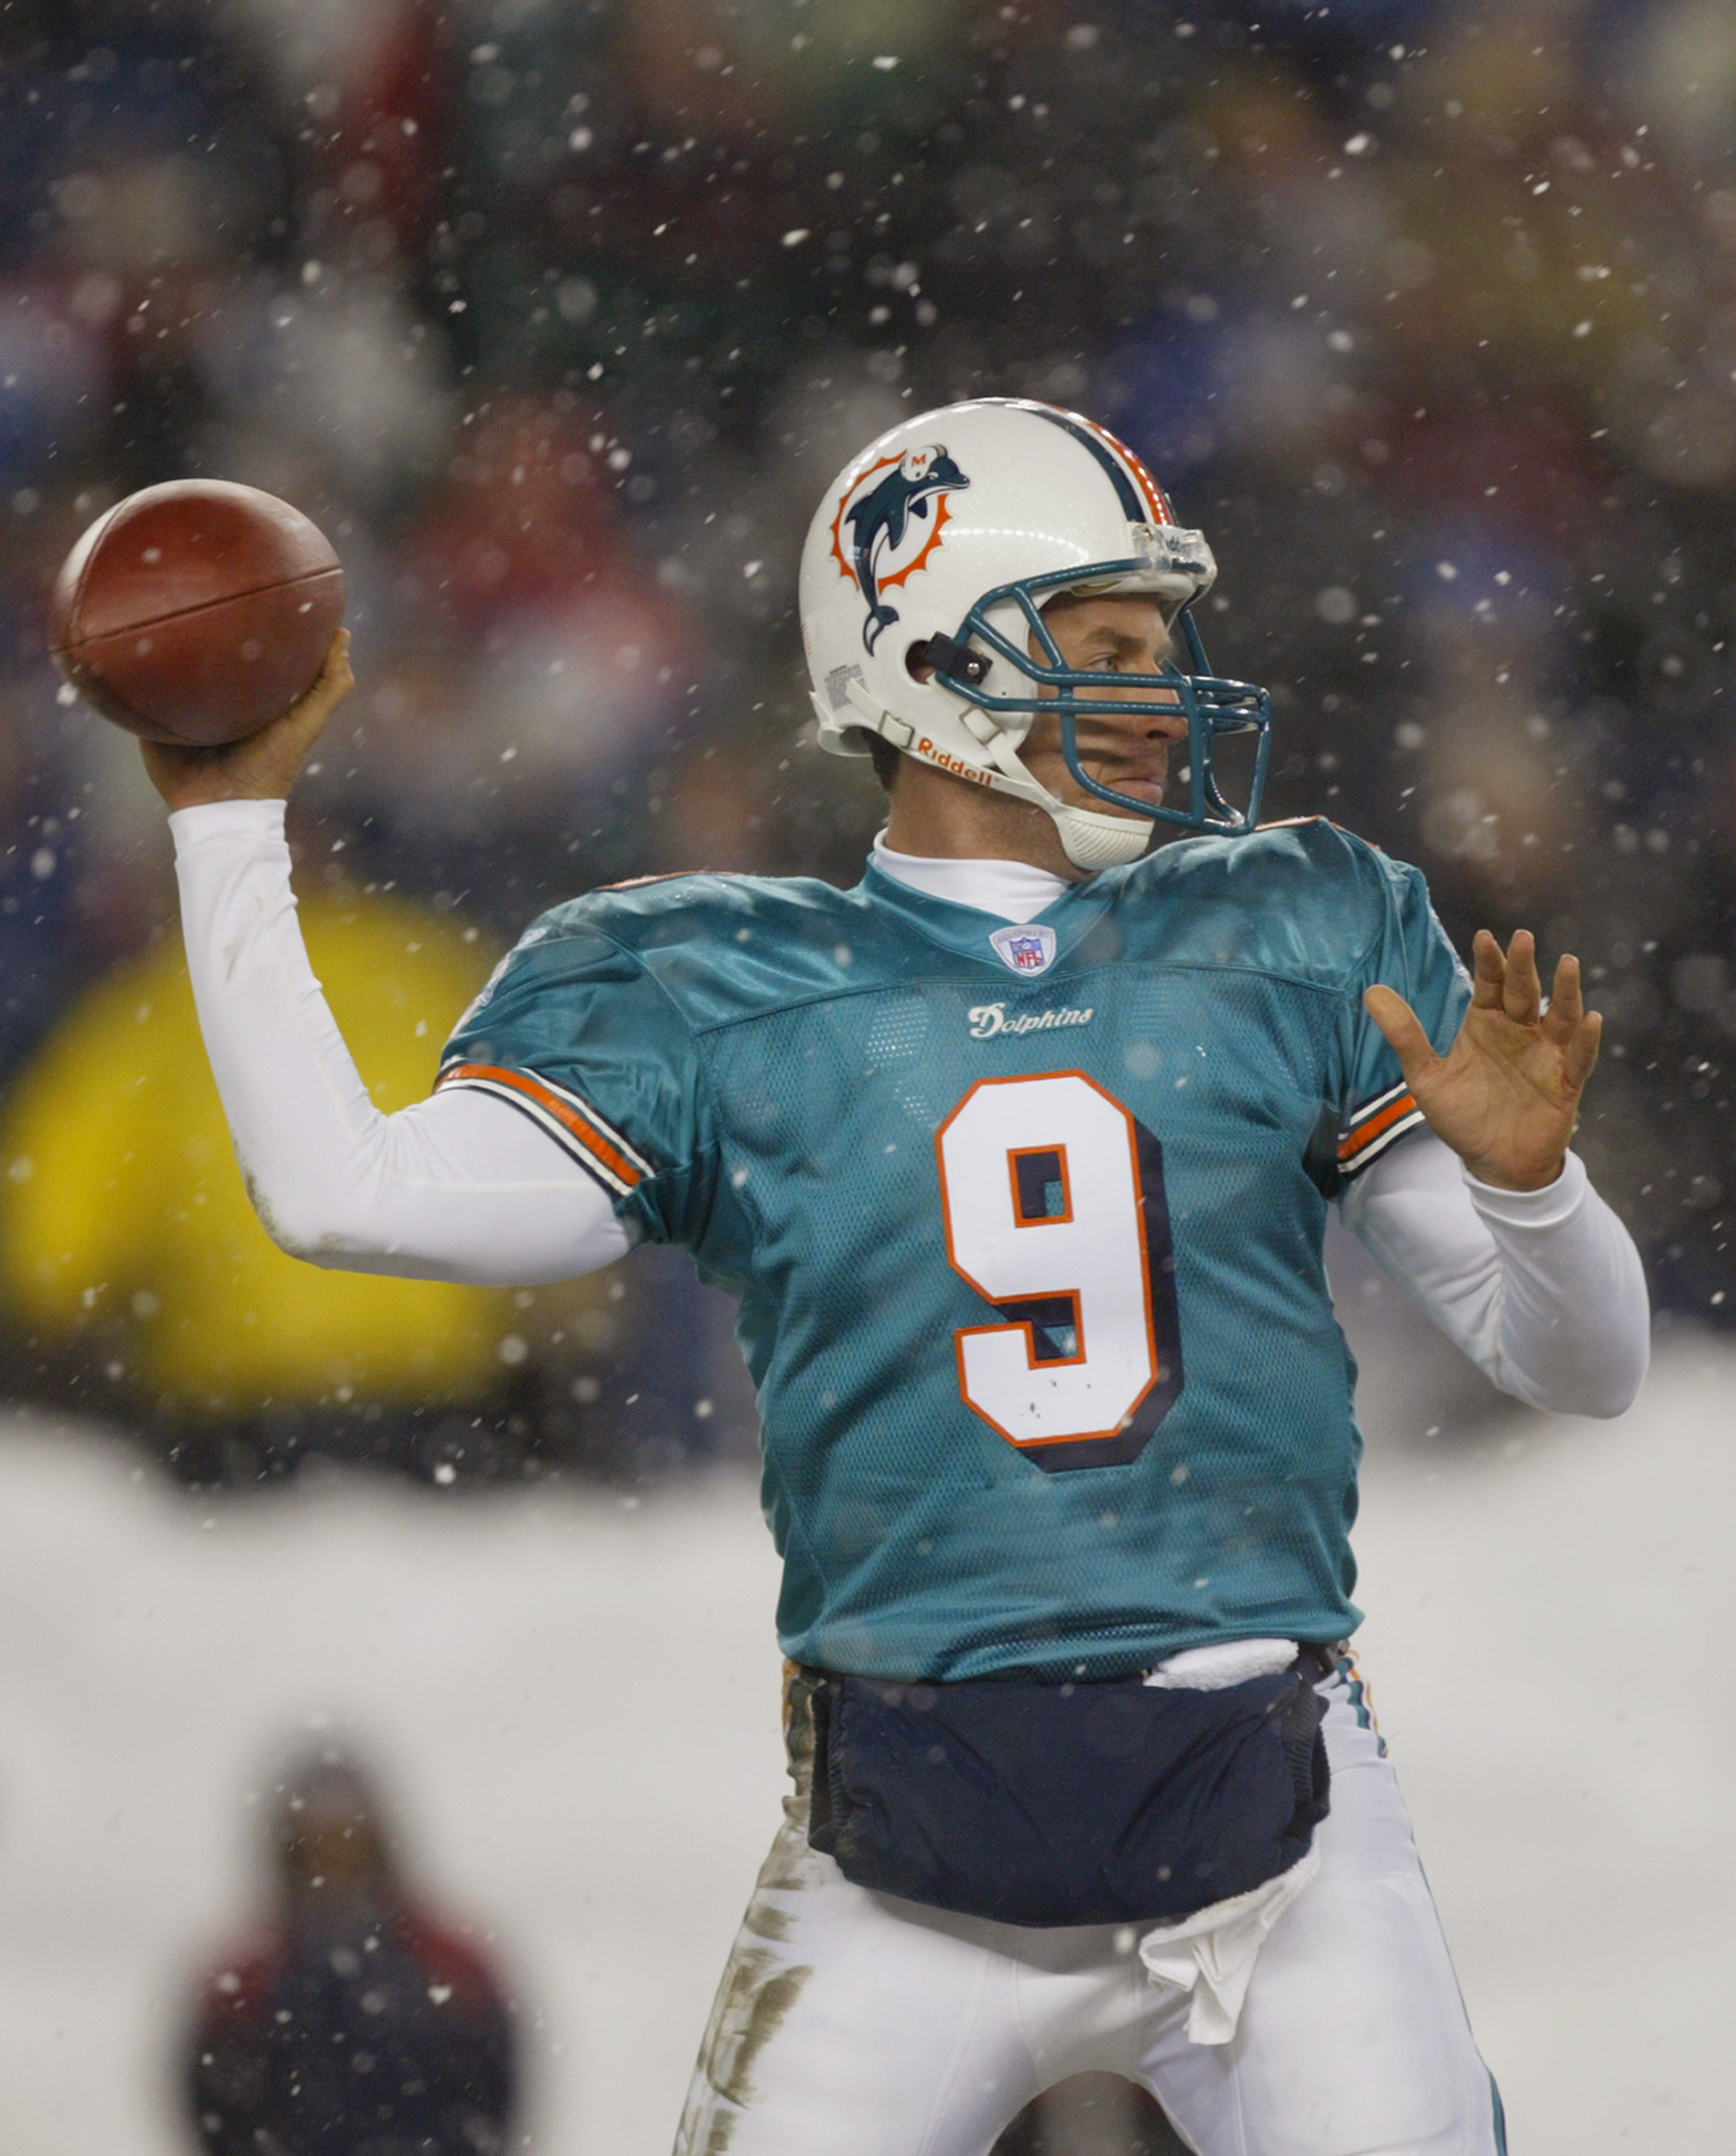 FOXBORO, MA - DECEMBER 7:  Quarterback Jay Fiedler #9 of the Miami Dolphins passses the ball against the New England Patriots during the game at Gillette Stadium on December 7, 2003 in Foxboro, Massachusetts. The Patriots defeated the Dolphins 16-0.  (Pho